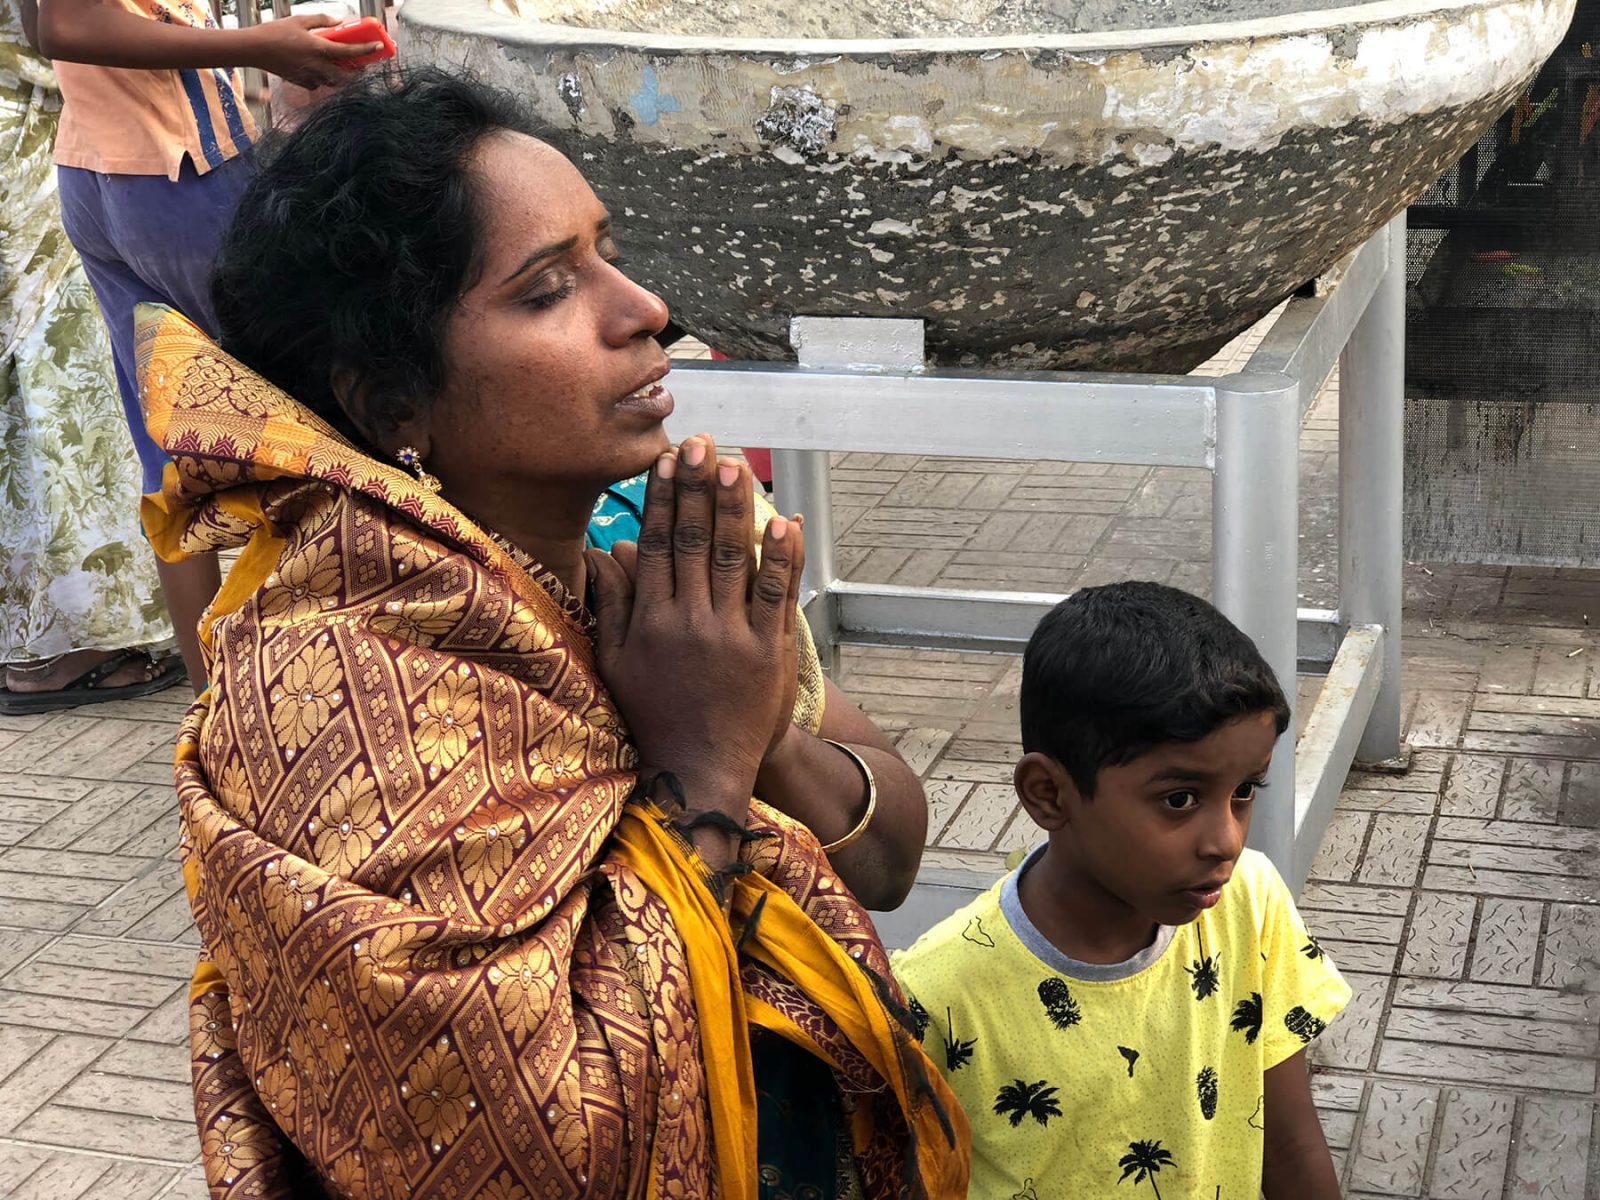 Women praying with child next to her India College of Ministry